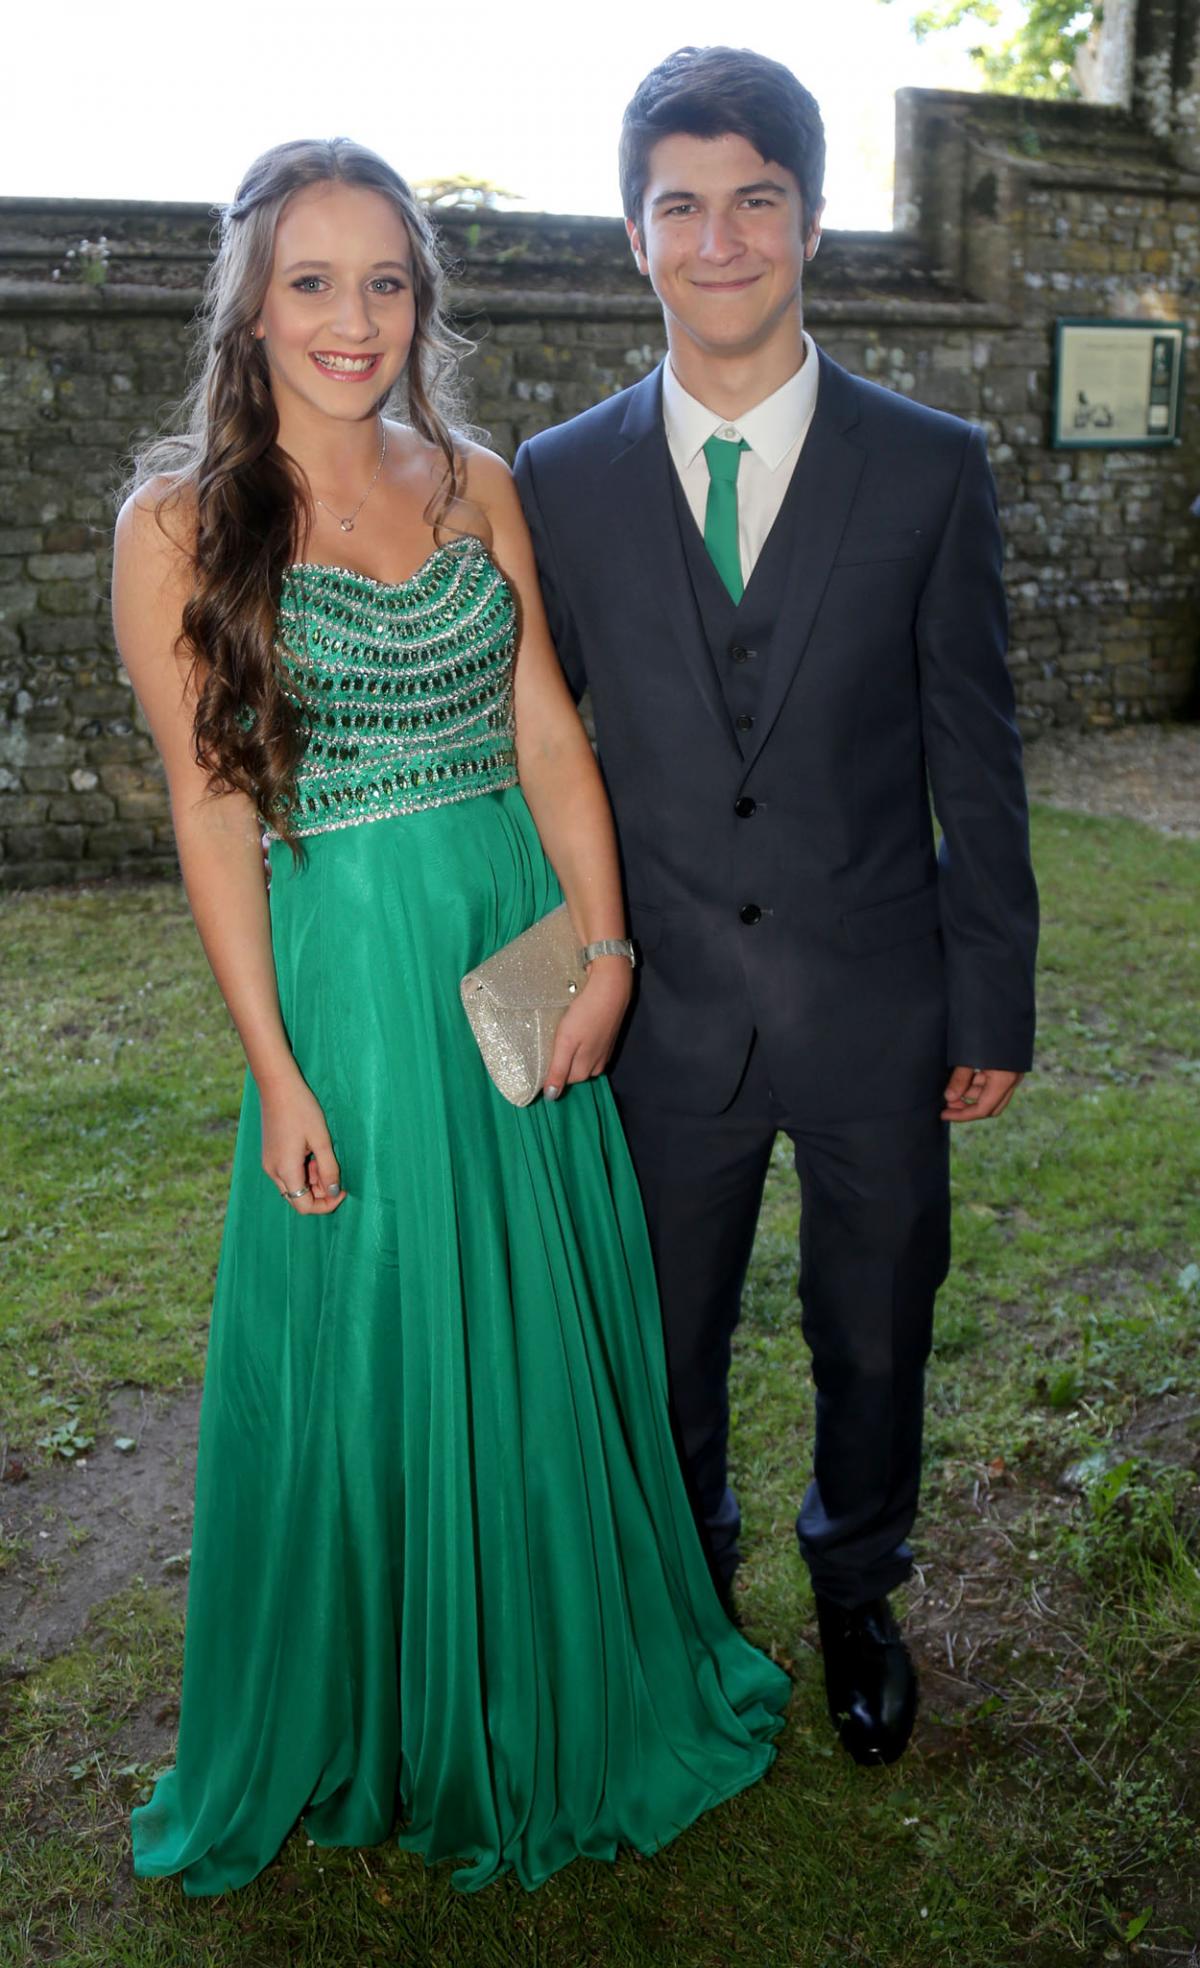 Pictures from Lytchett Minster School Year 11 prom at Athelhampton House on 19th June 2015 by Sam Sheldon. 